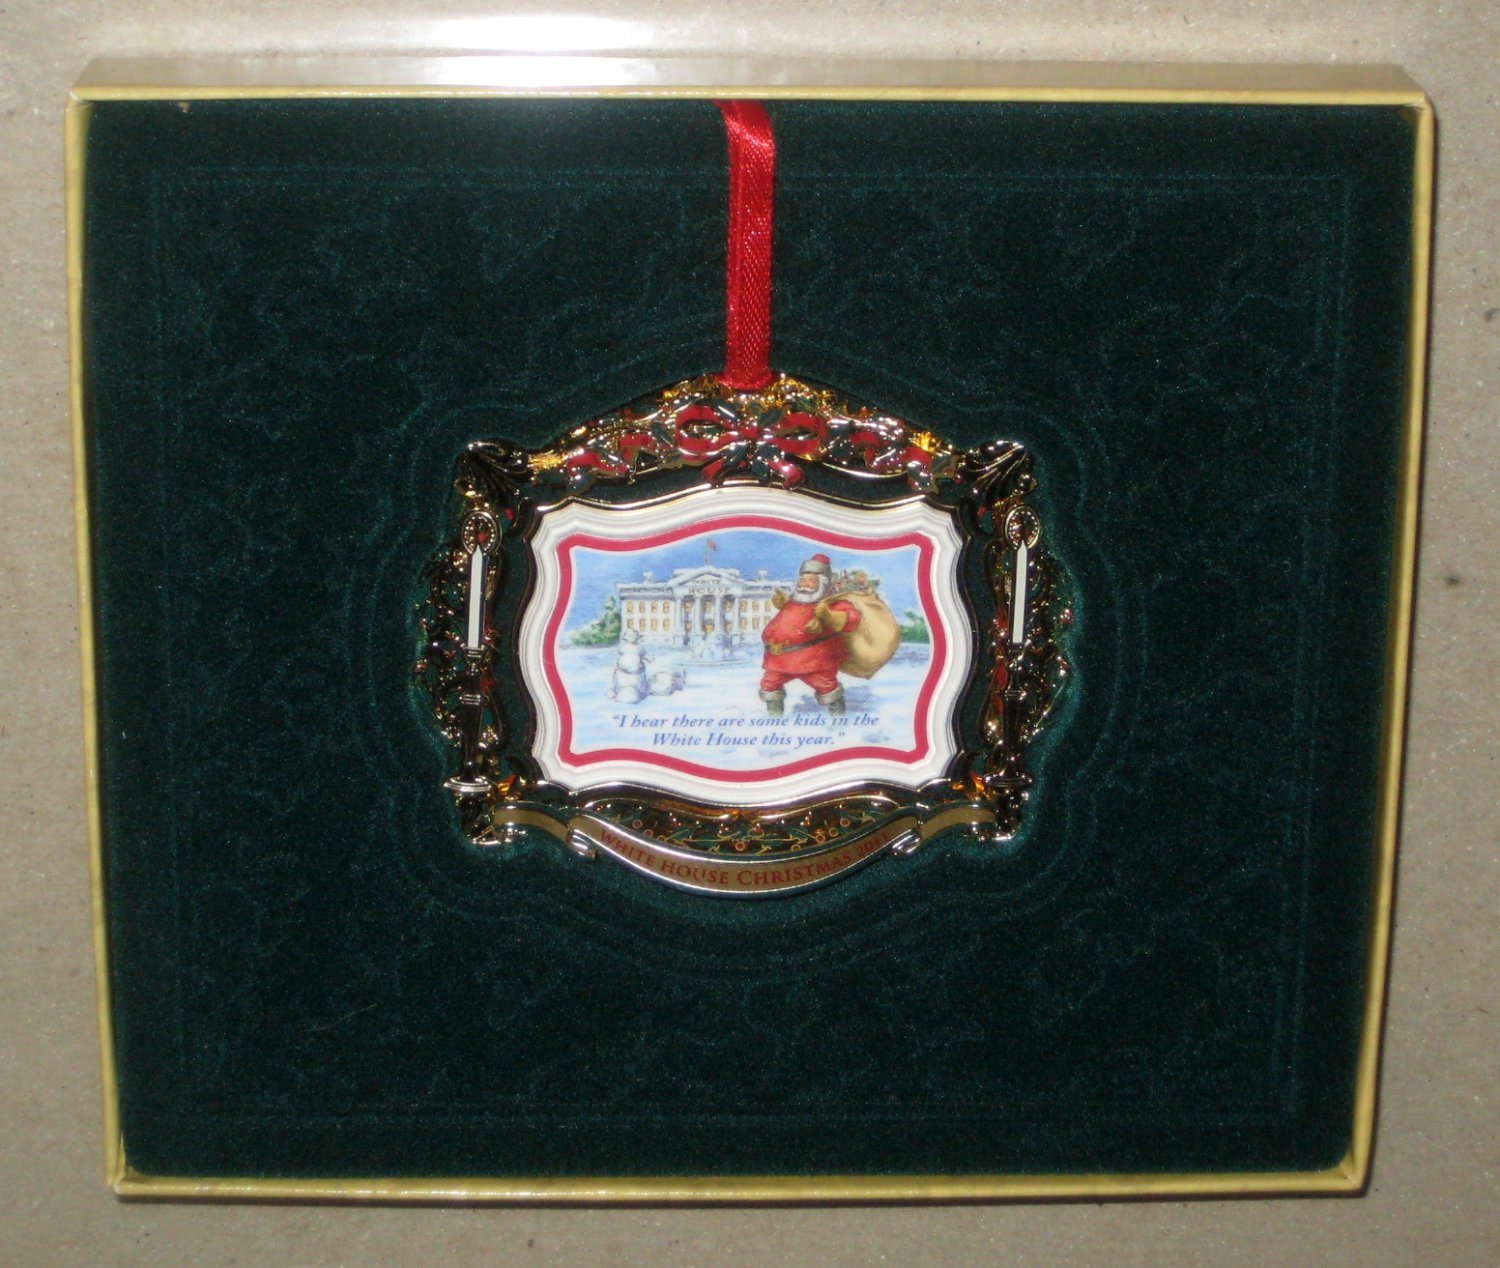 2011 White House Christmas Ornament Theodore Teddy Roosevelt 26th President WHHA NIB with Booklet